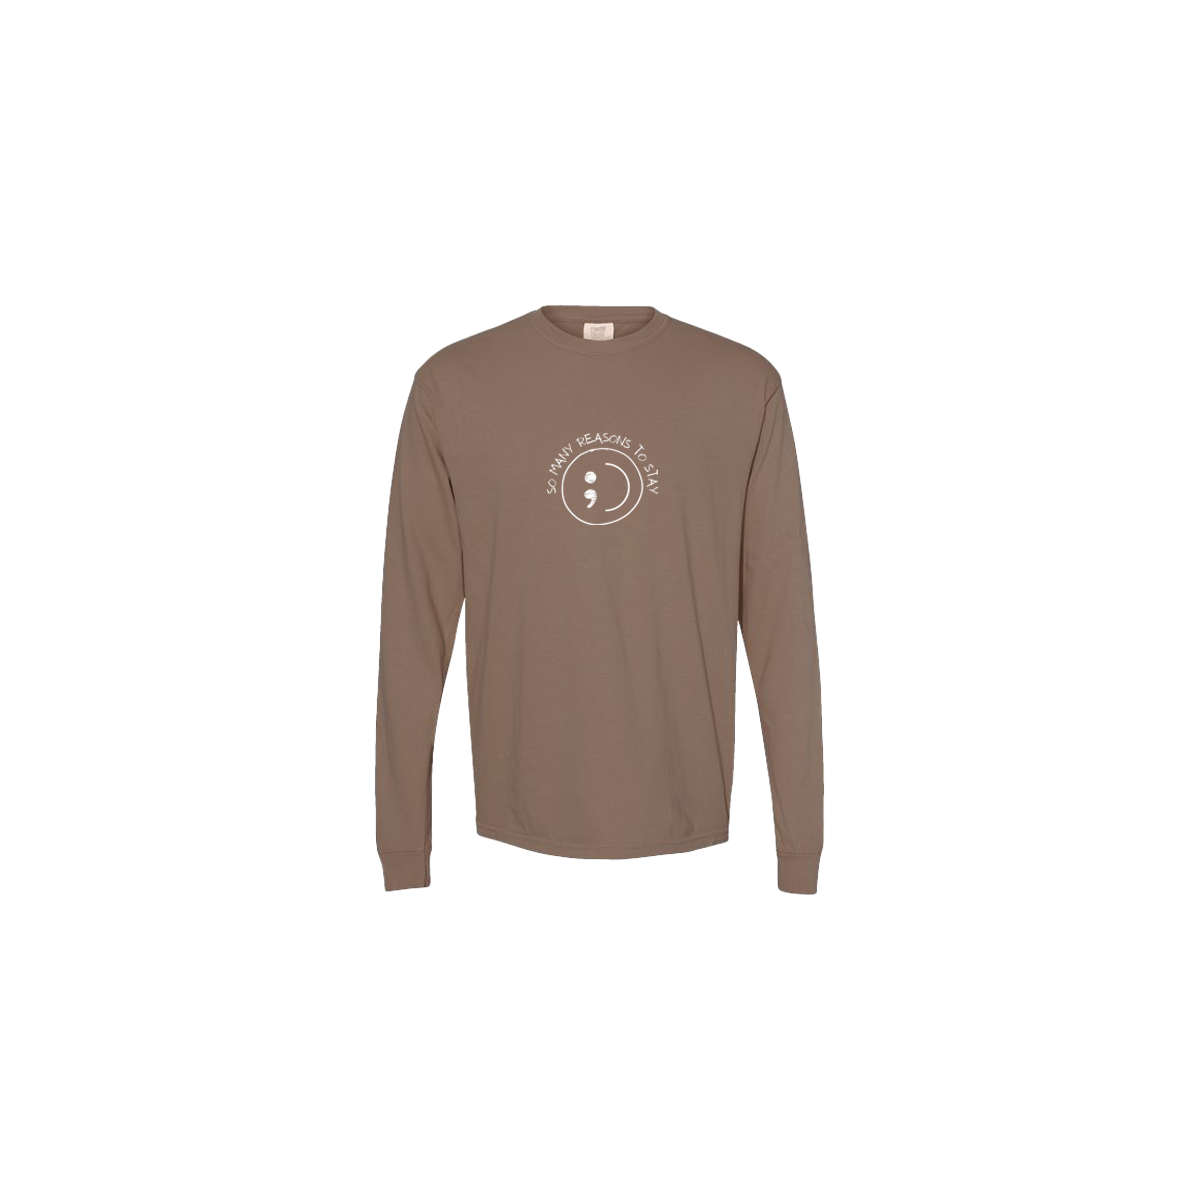 So Many Reasons to Stay Embroidered Brown Long Sleeve Tshirt - Mental Health Awareness Clothing